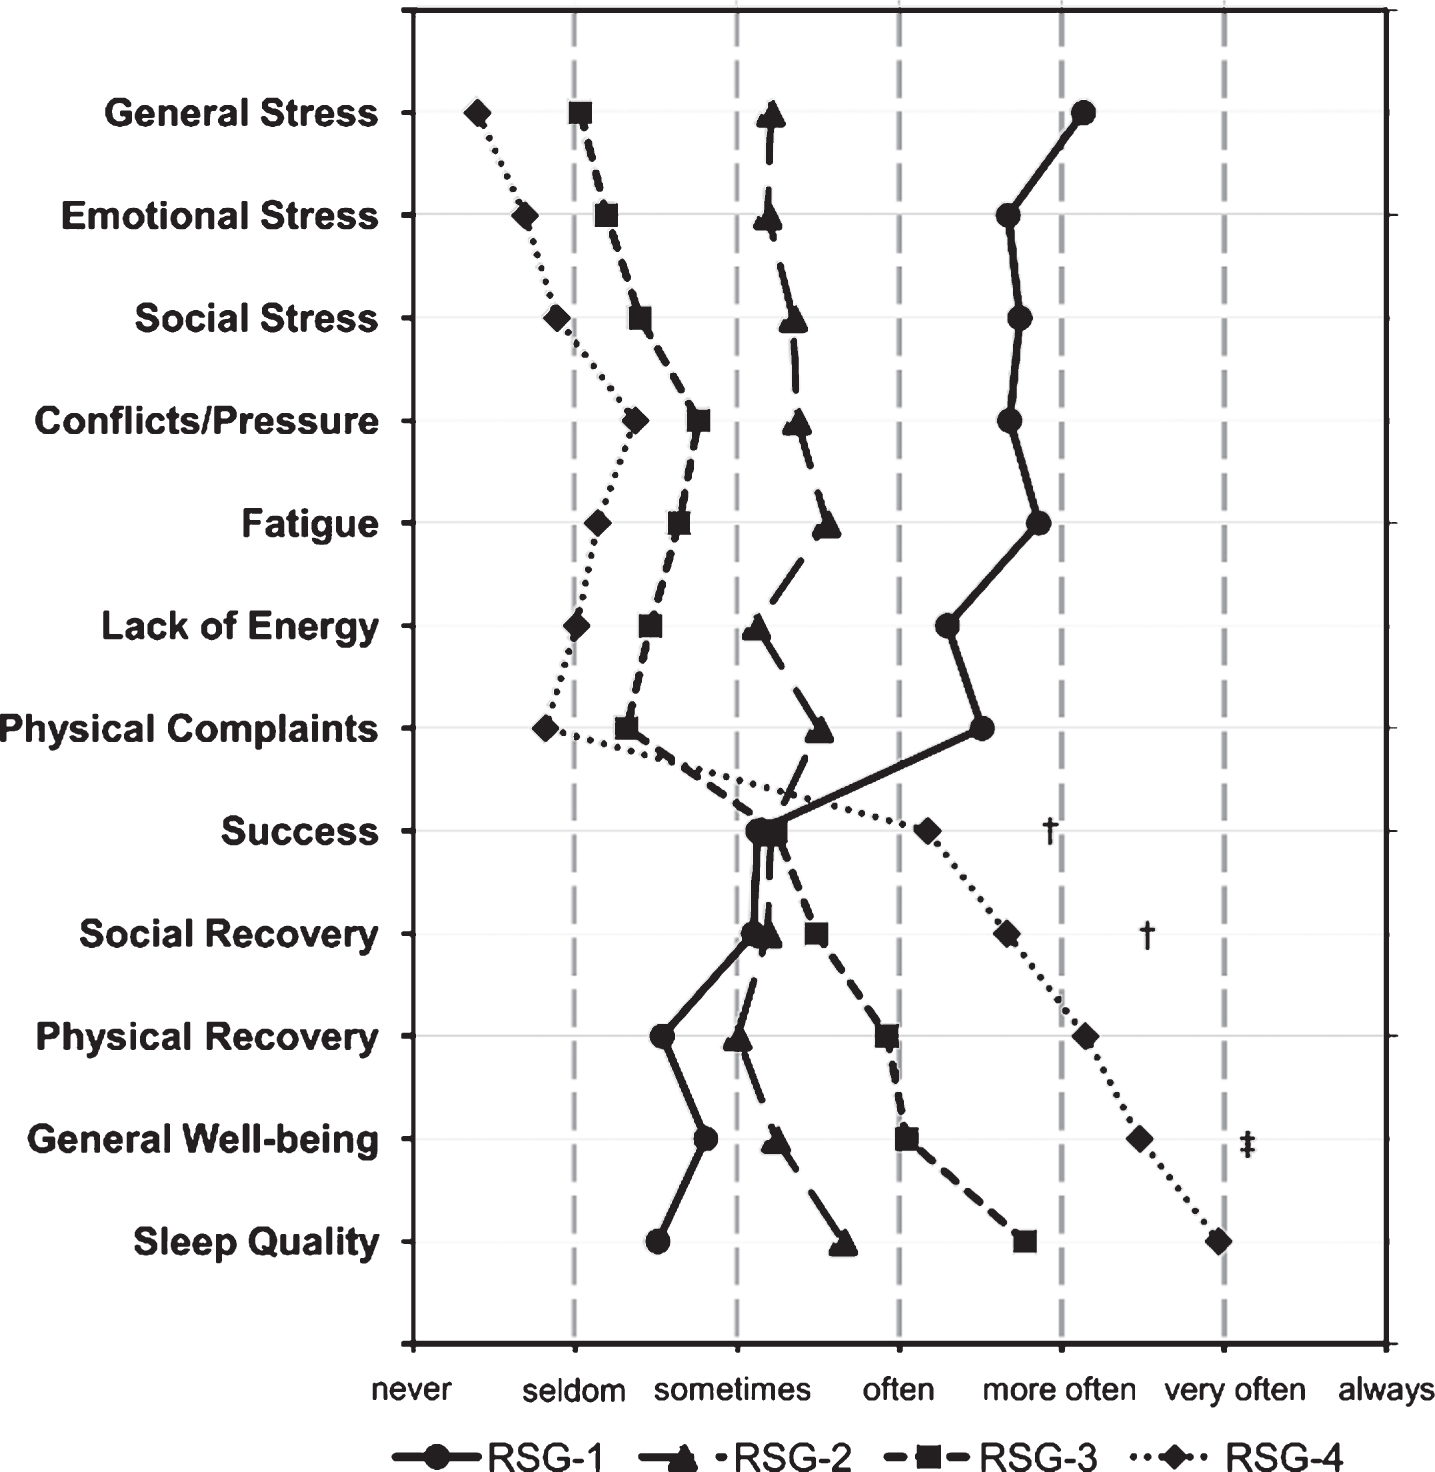 The profiles of the four Recovery-Stress Groups (RSG) formed by cluster analysis of the Recovery-Stress Questionnaire scales, N = 263. All groups differed significantly on each scale (p < 0.01), if not indicated otherwise. † No significant differences between the groups RSG-1, RSG-2, and RSG-3. ‡No significant differences between the groups RSG-1 and RSG-2.